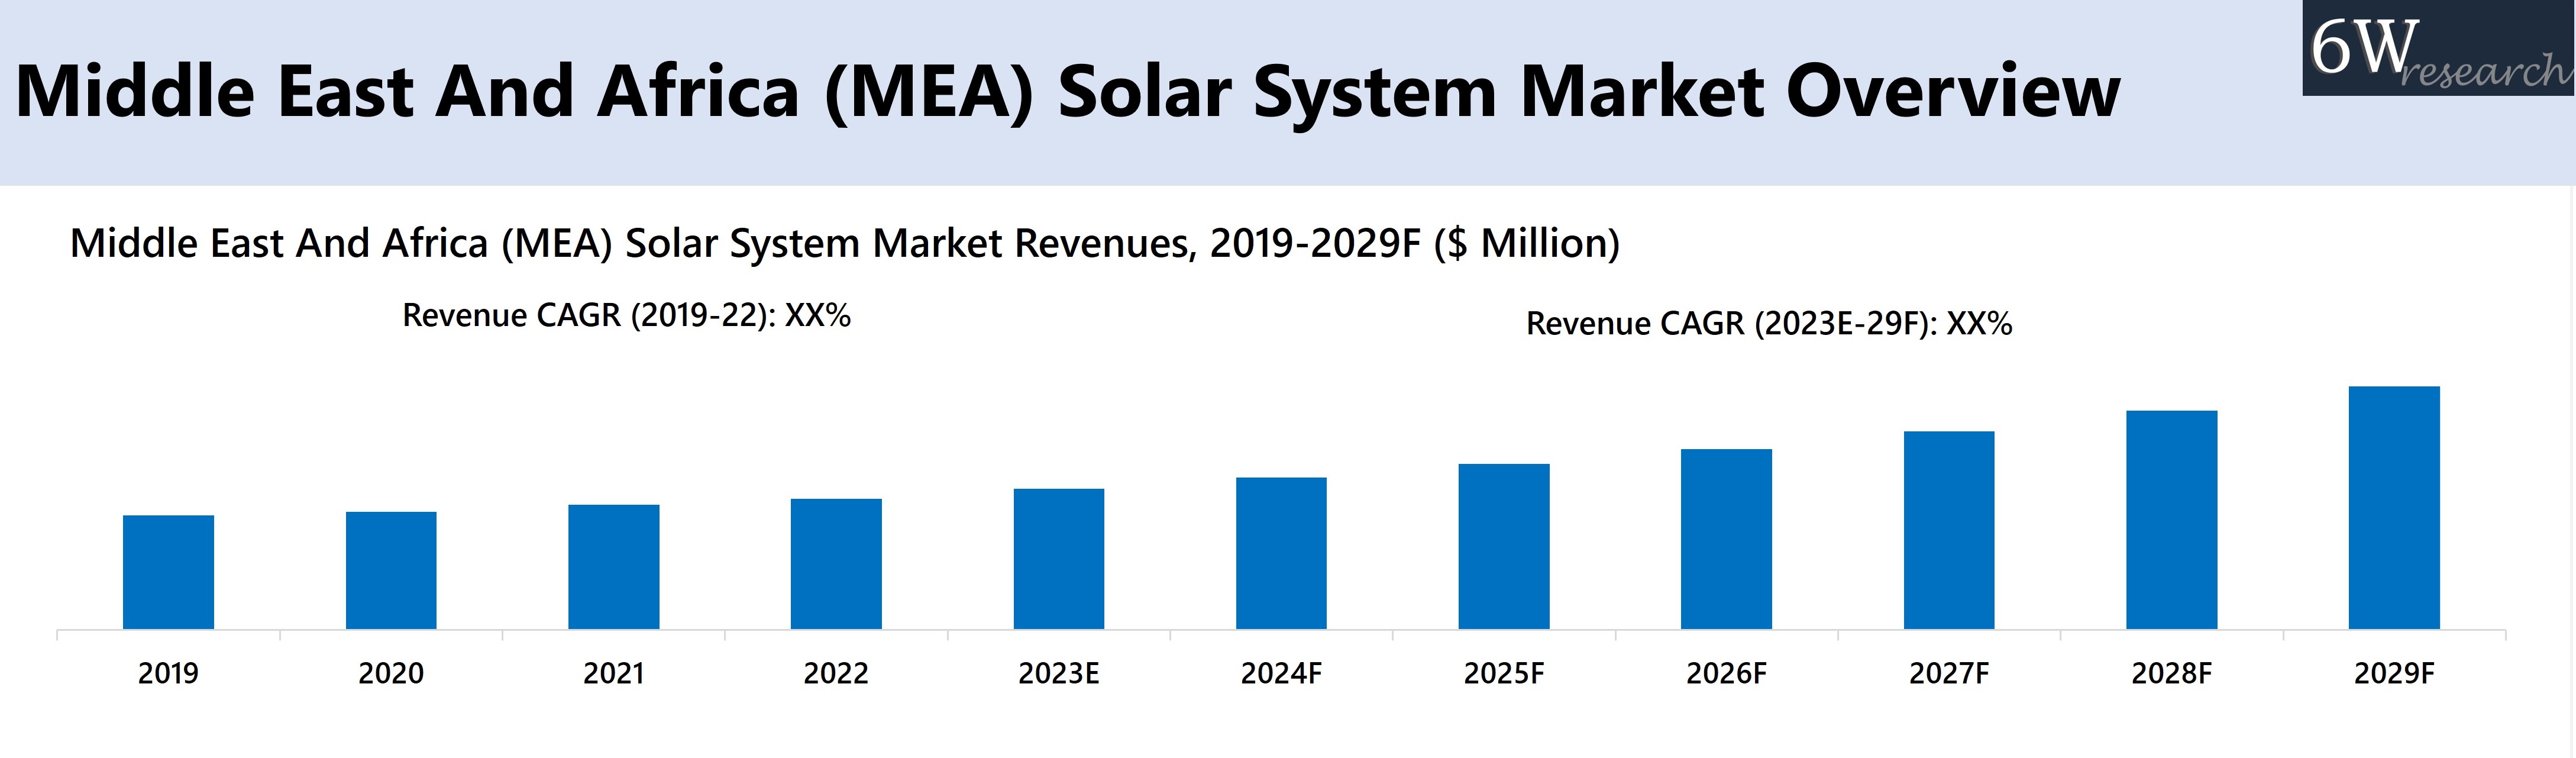 Middle East And Africa (MEA) Solar System Market Overview